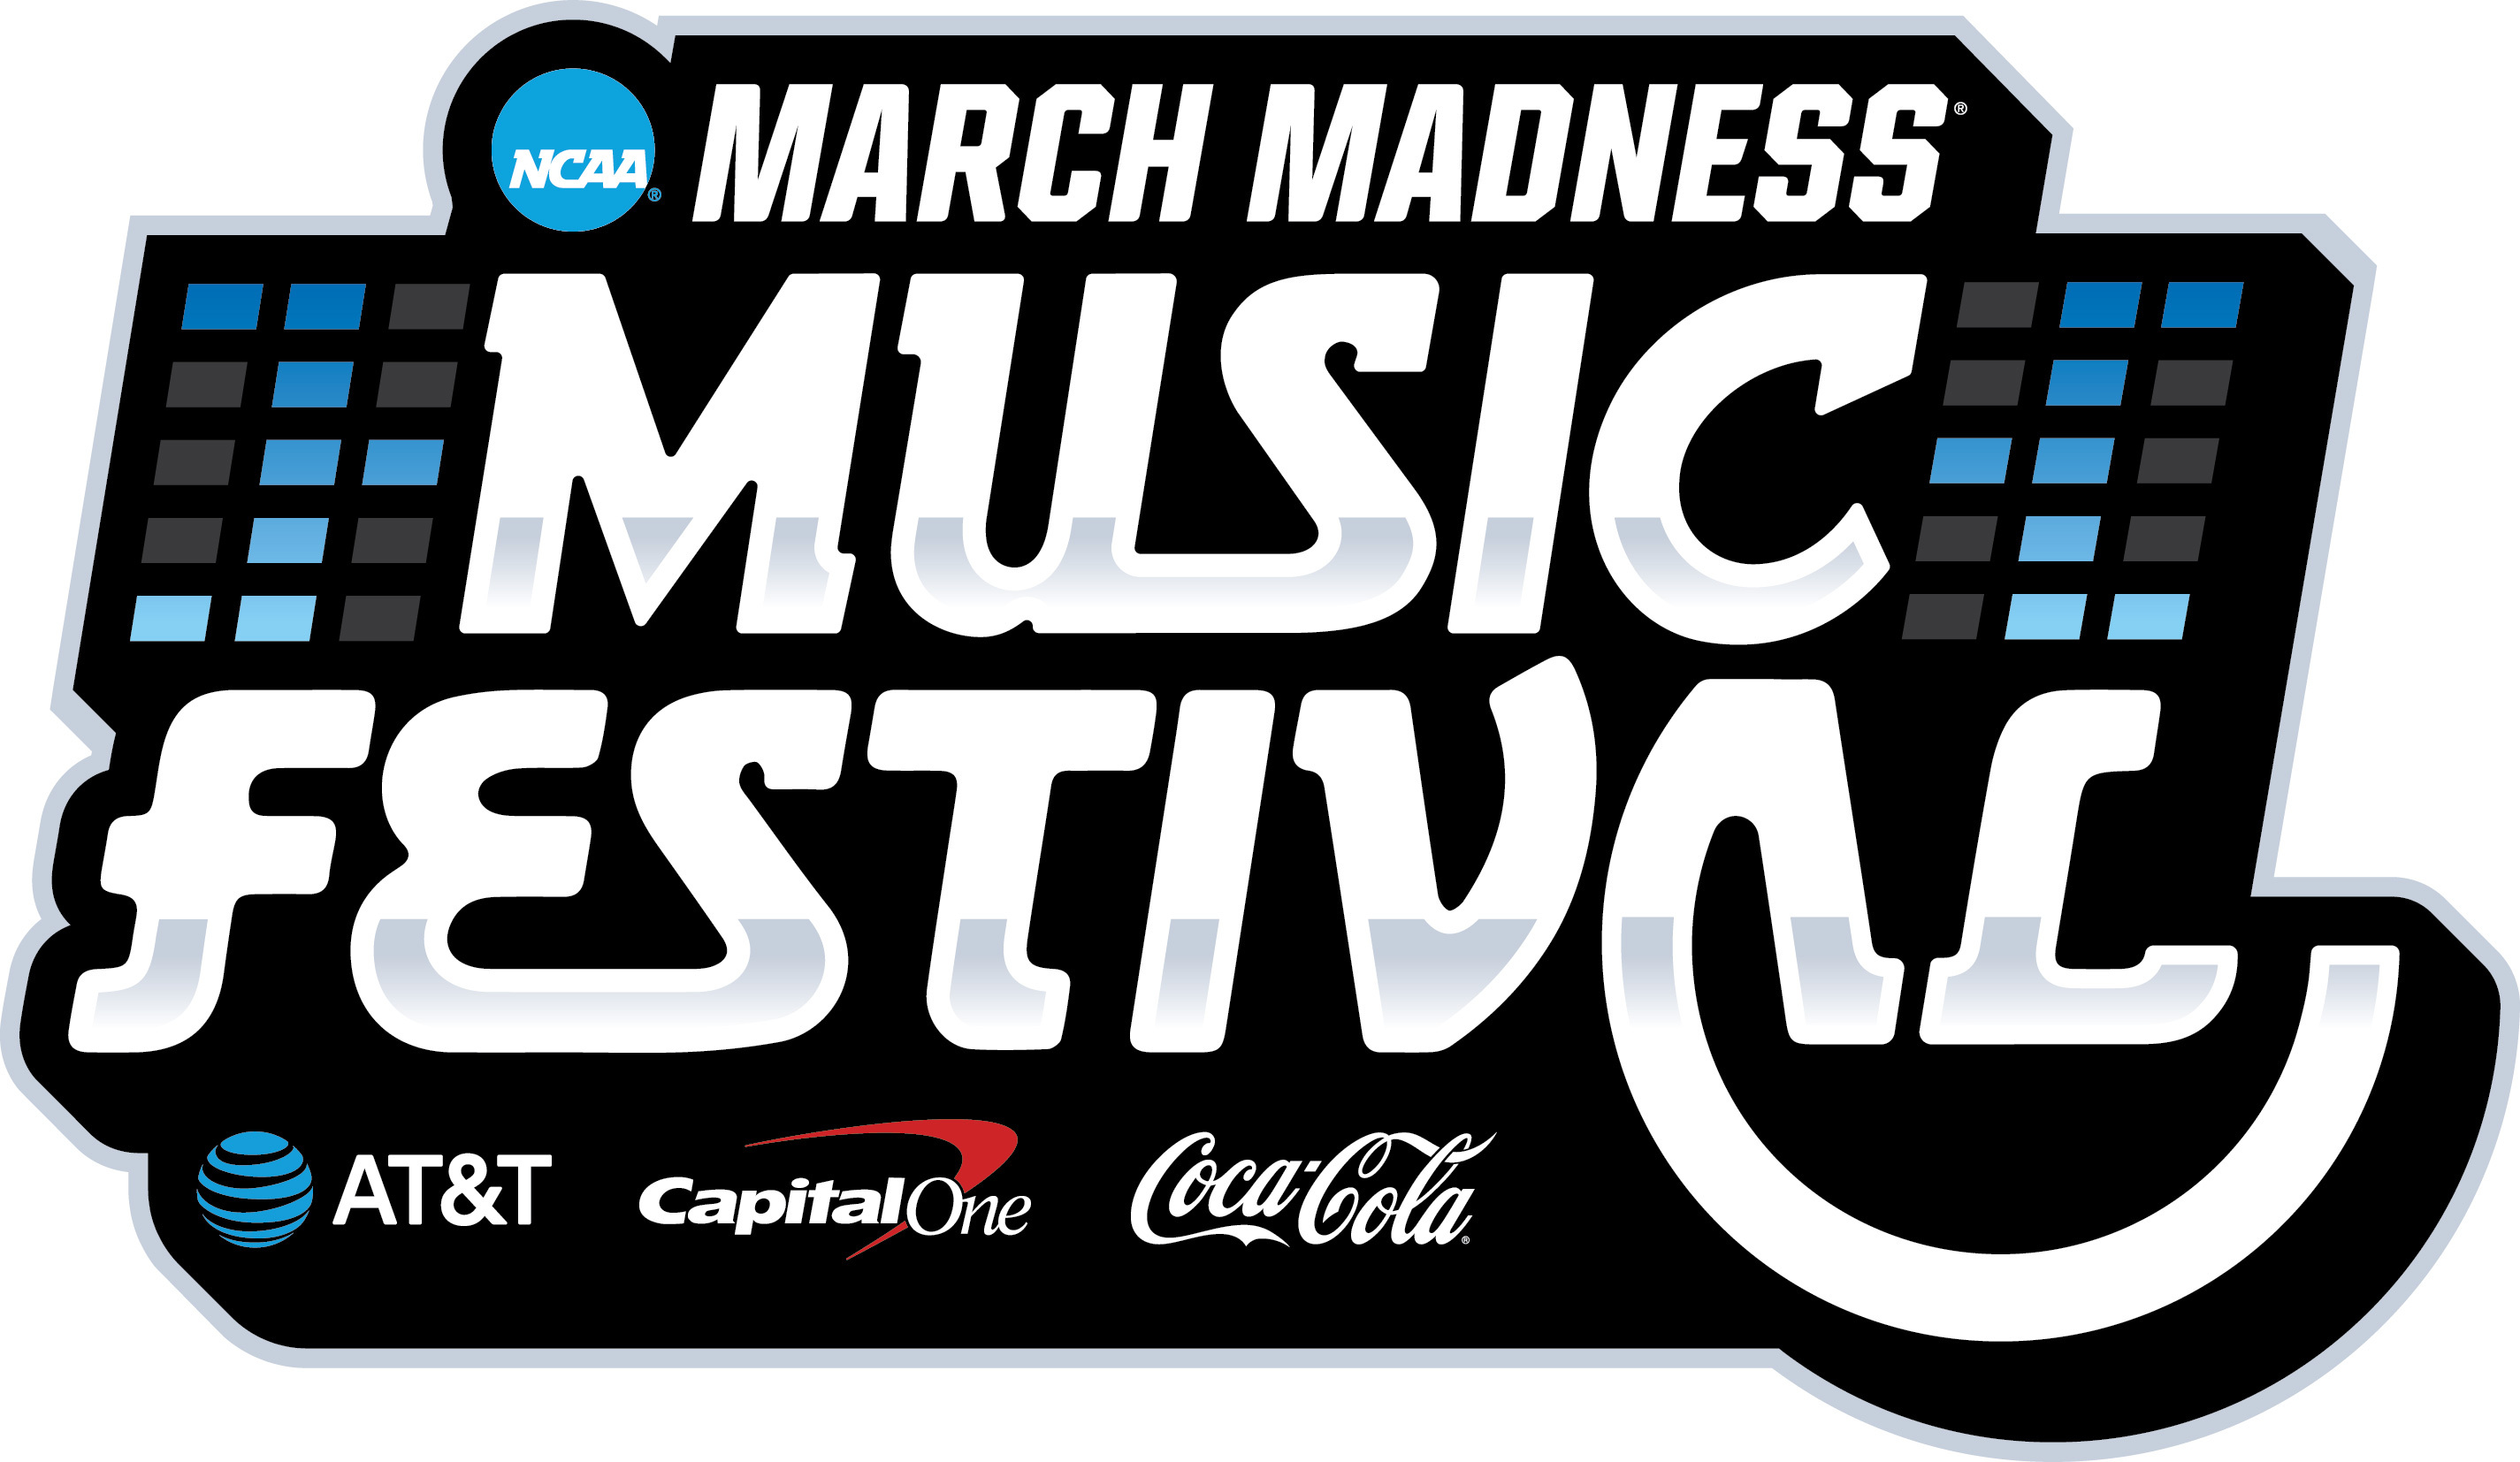 Lil Nas X, Tim McGraw, Keith Urban, Little Big Town, Maggie Rogers and Mickey Guyton to Perform as Part of the 2023 NCAA March Madness Music Festival in Houston March 31-April 2 